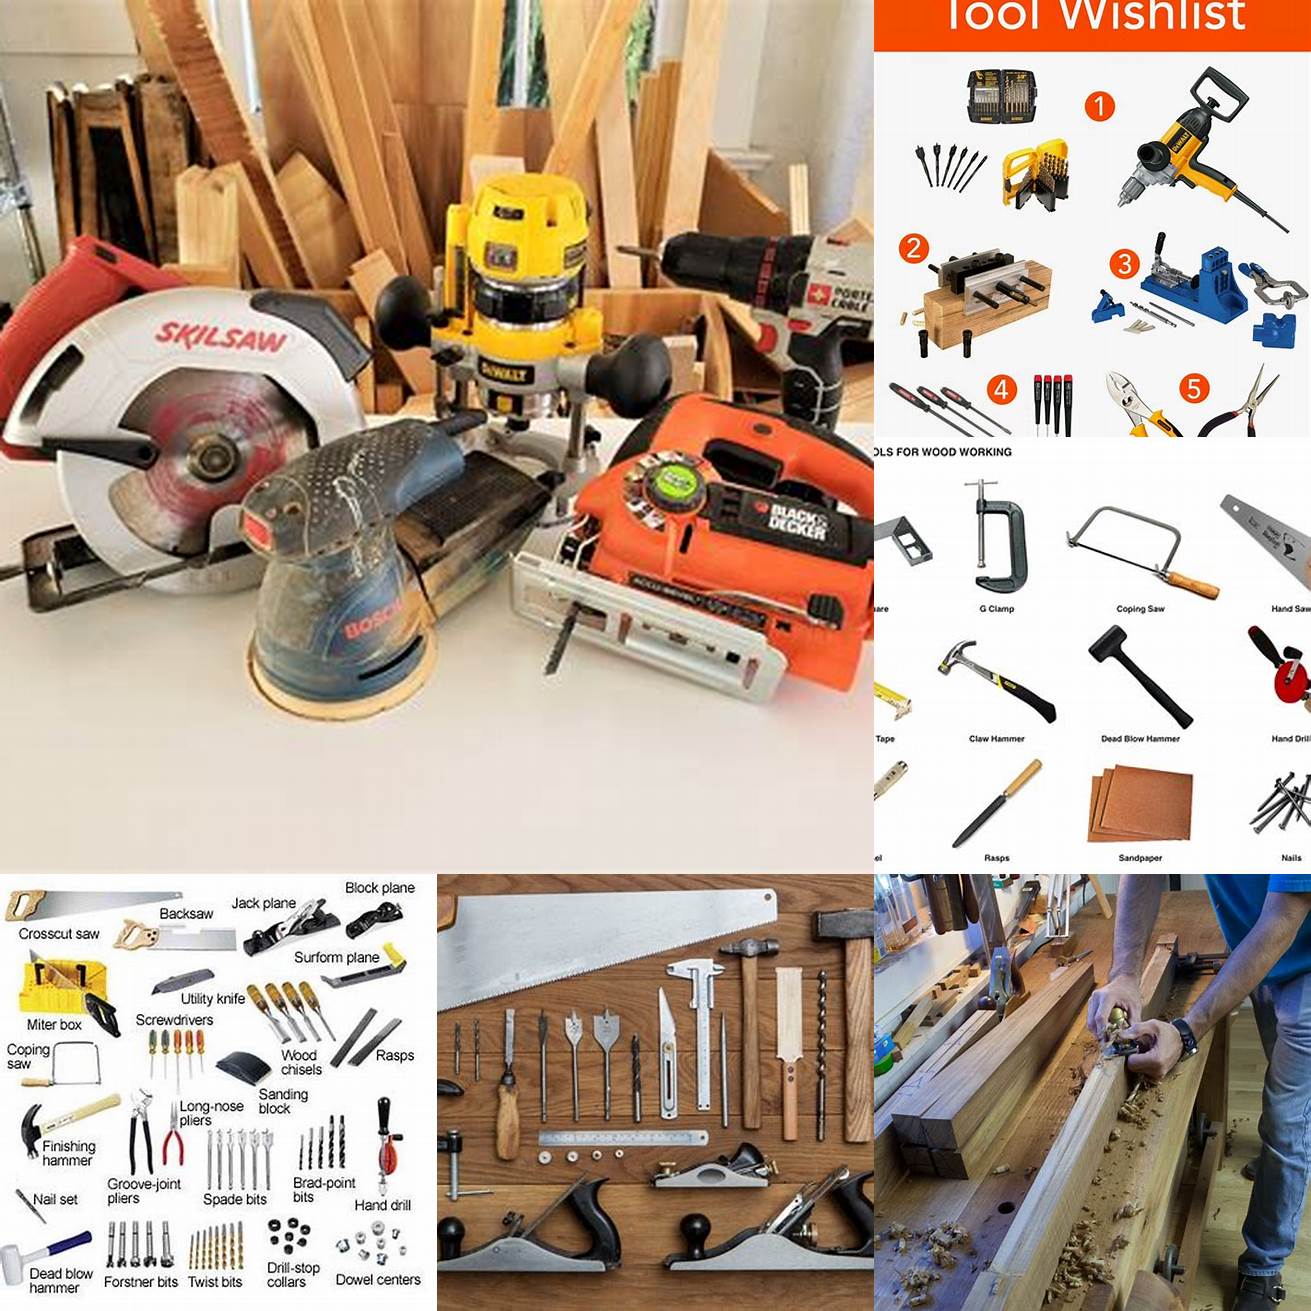 Tools Needed for Working with Teak Wood